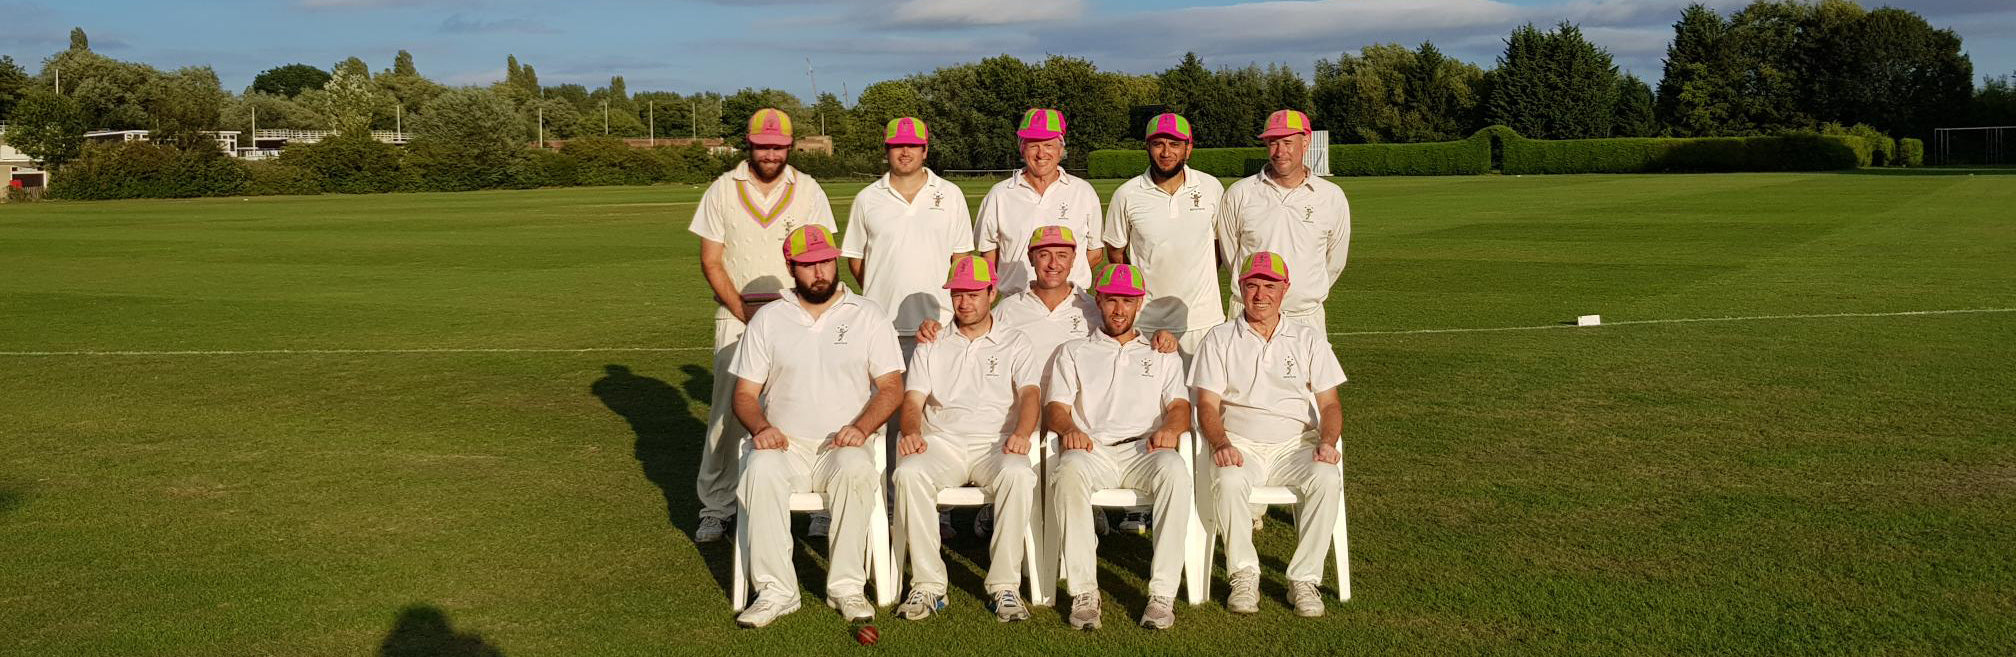 The Nepotists Cricket Club Team Photo At Oxford, 2018